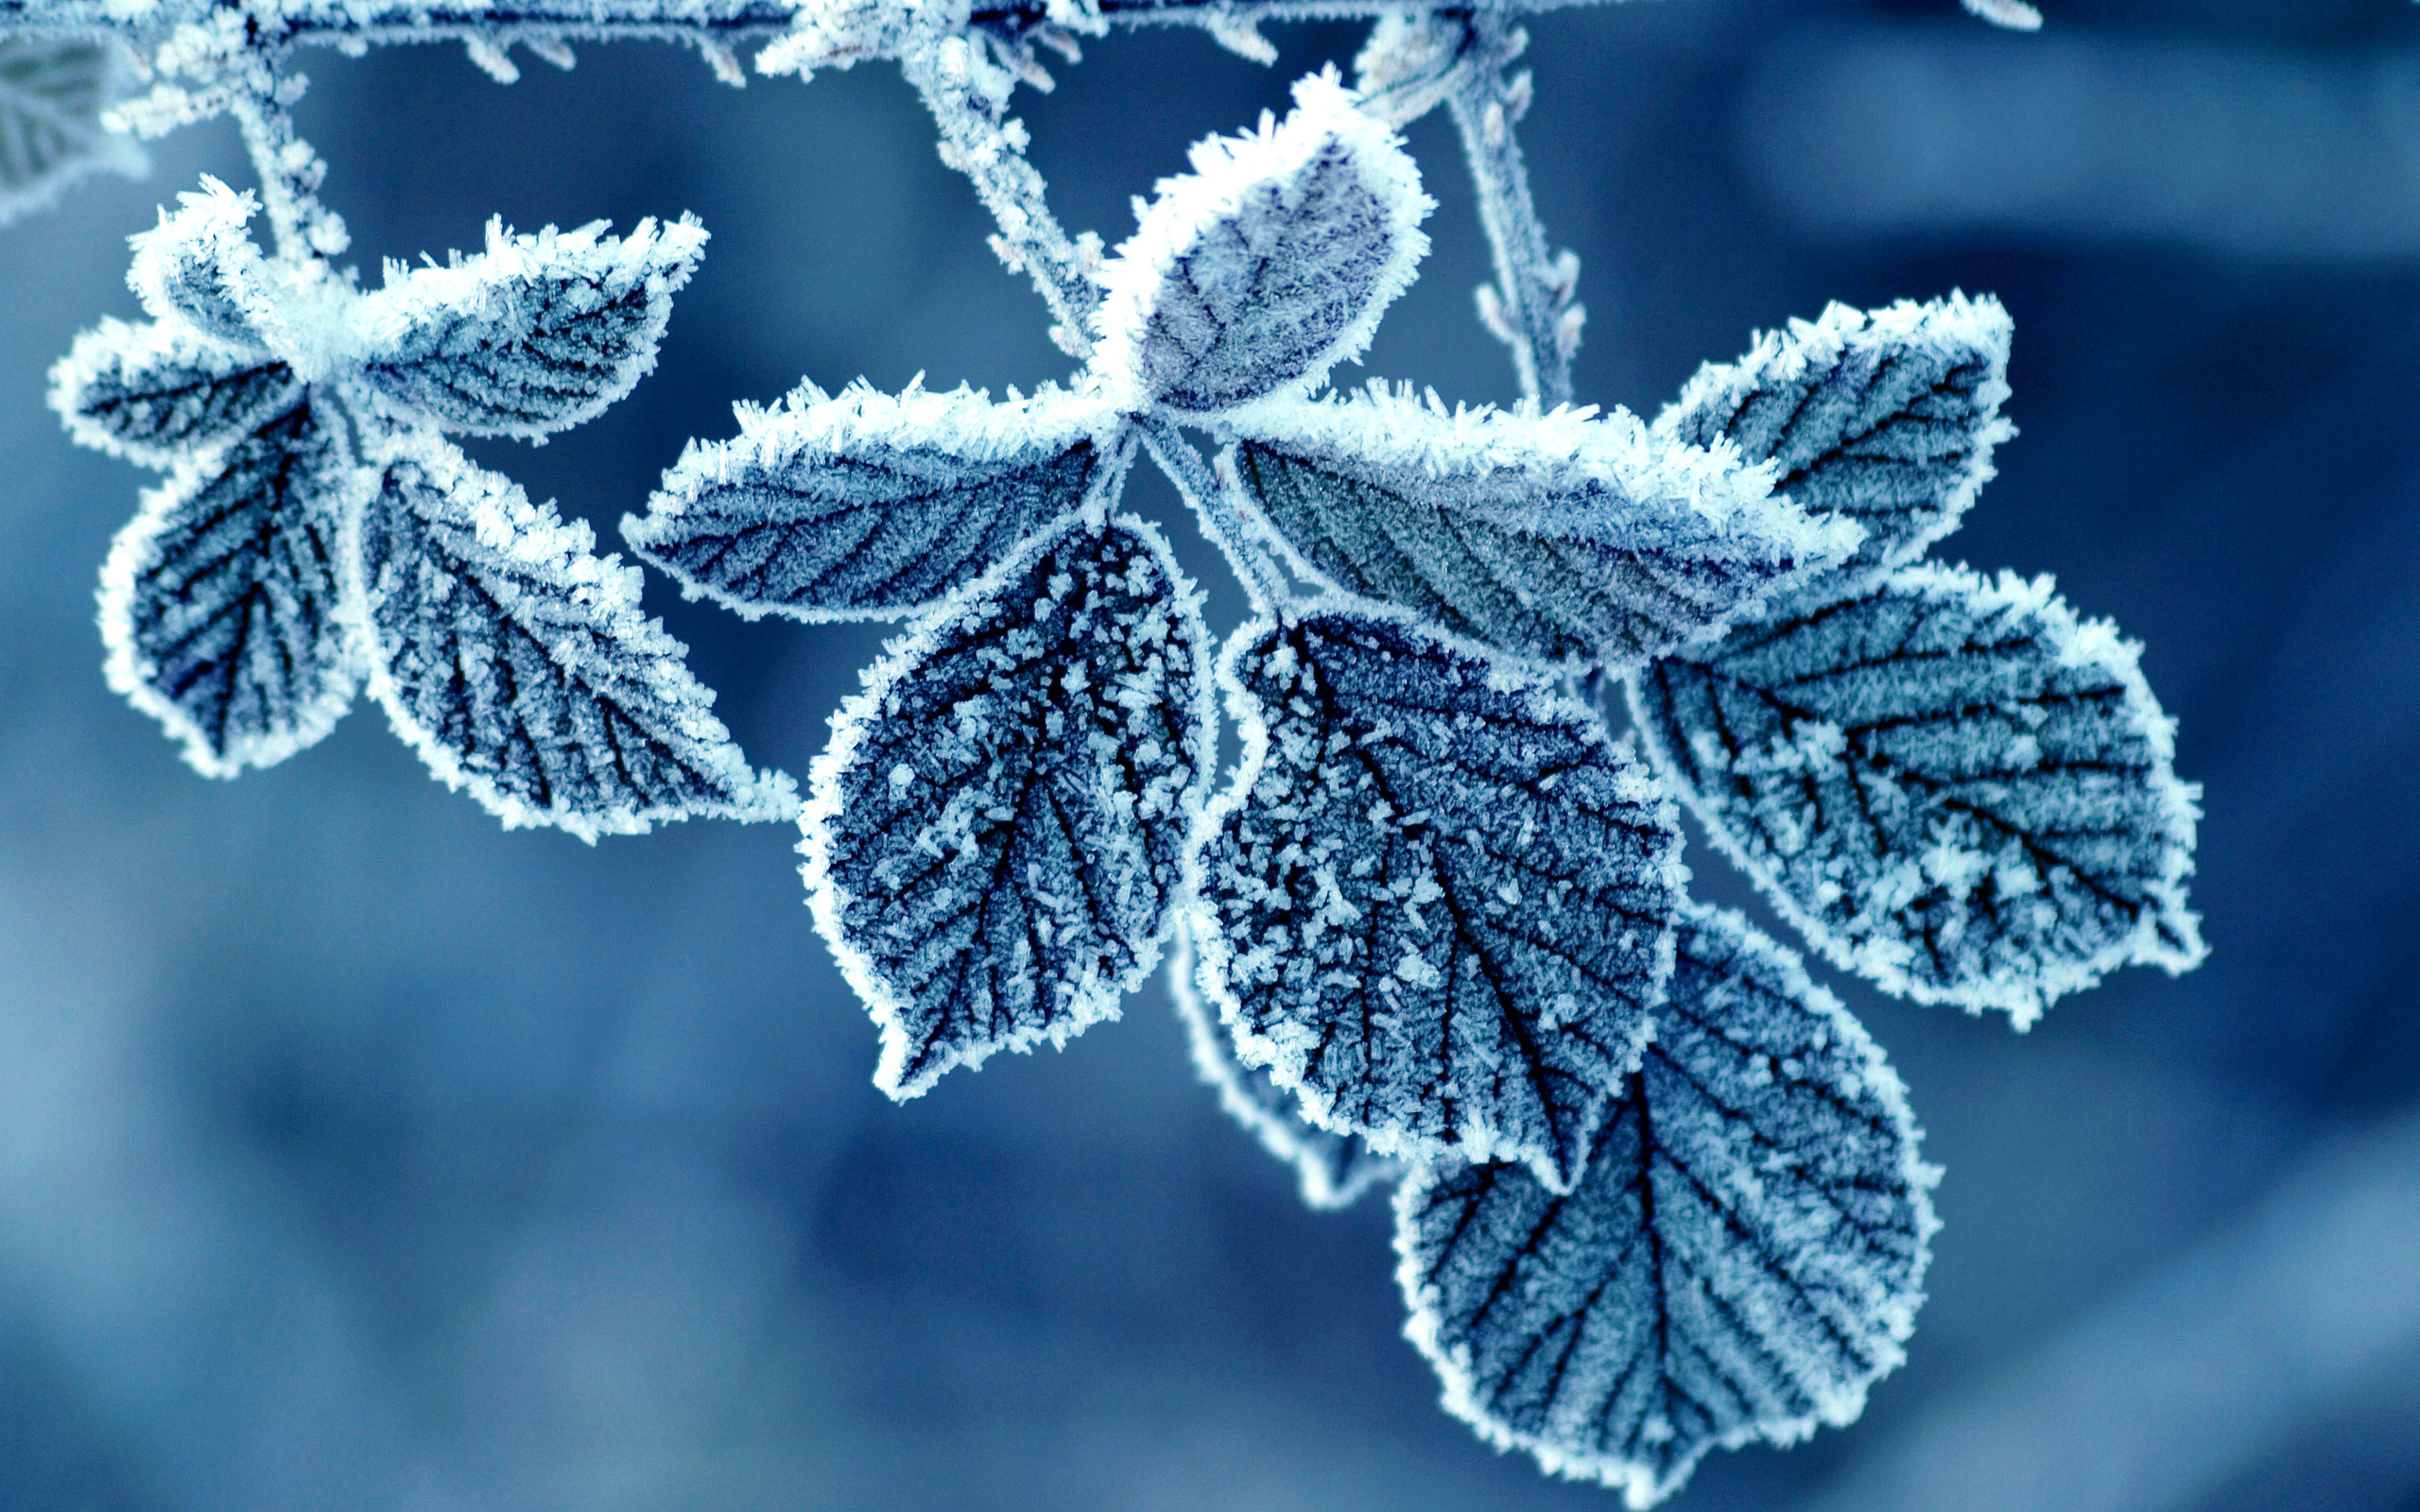 Cold Winter Morning Frost Leaves Wallpapers   2560x1600   1429011 2560x1600